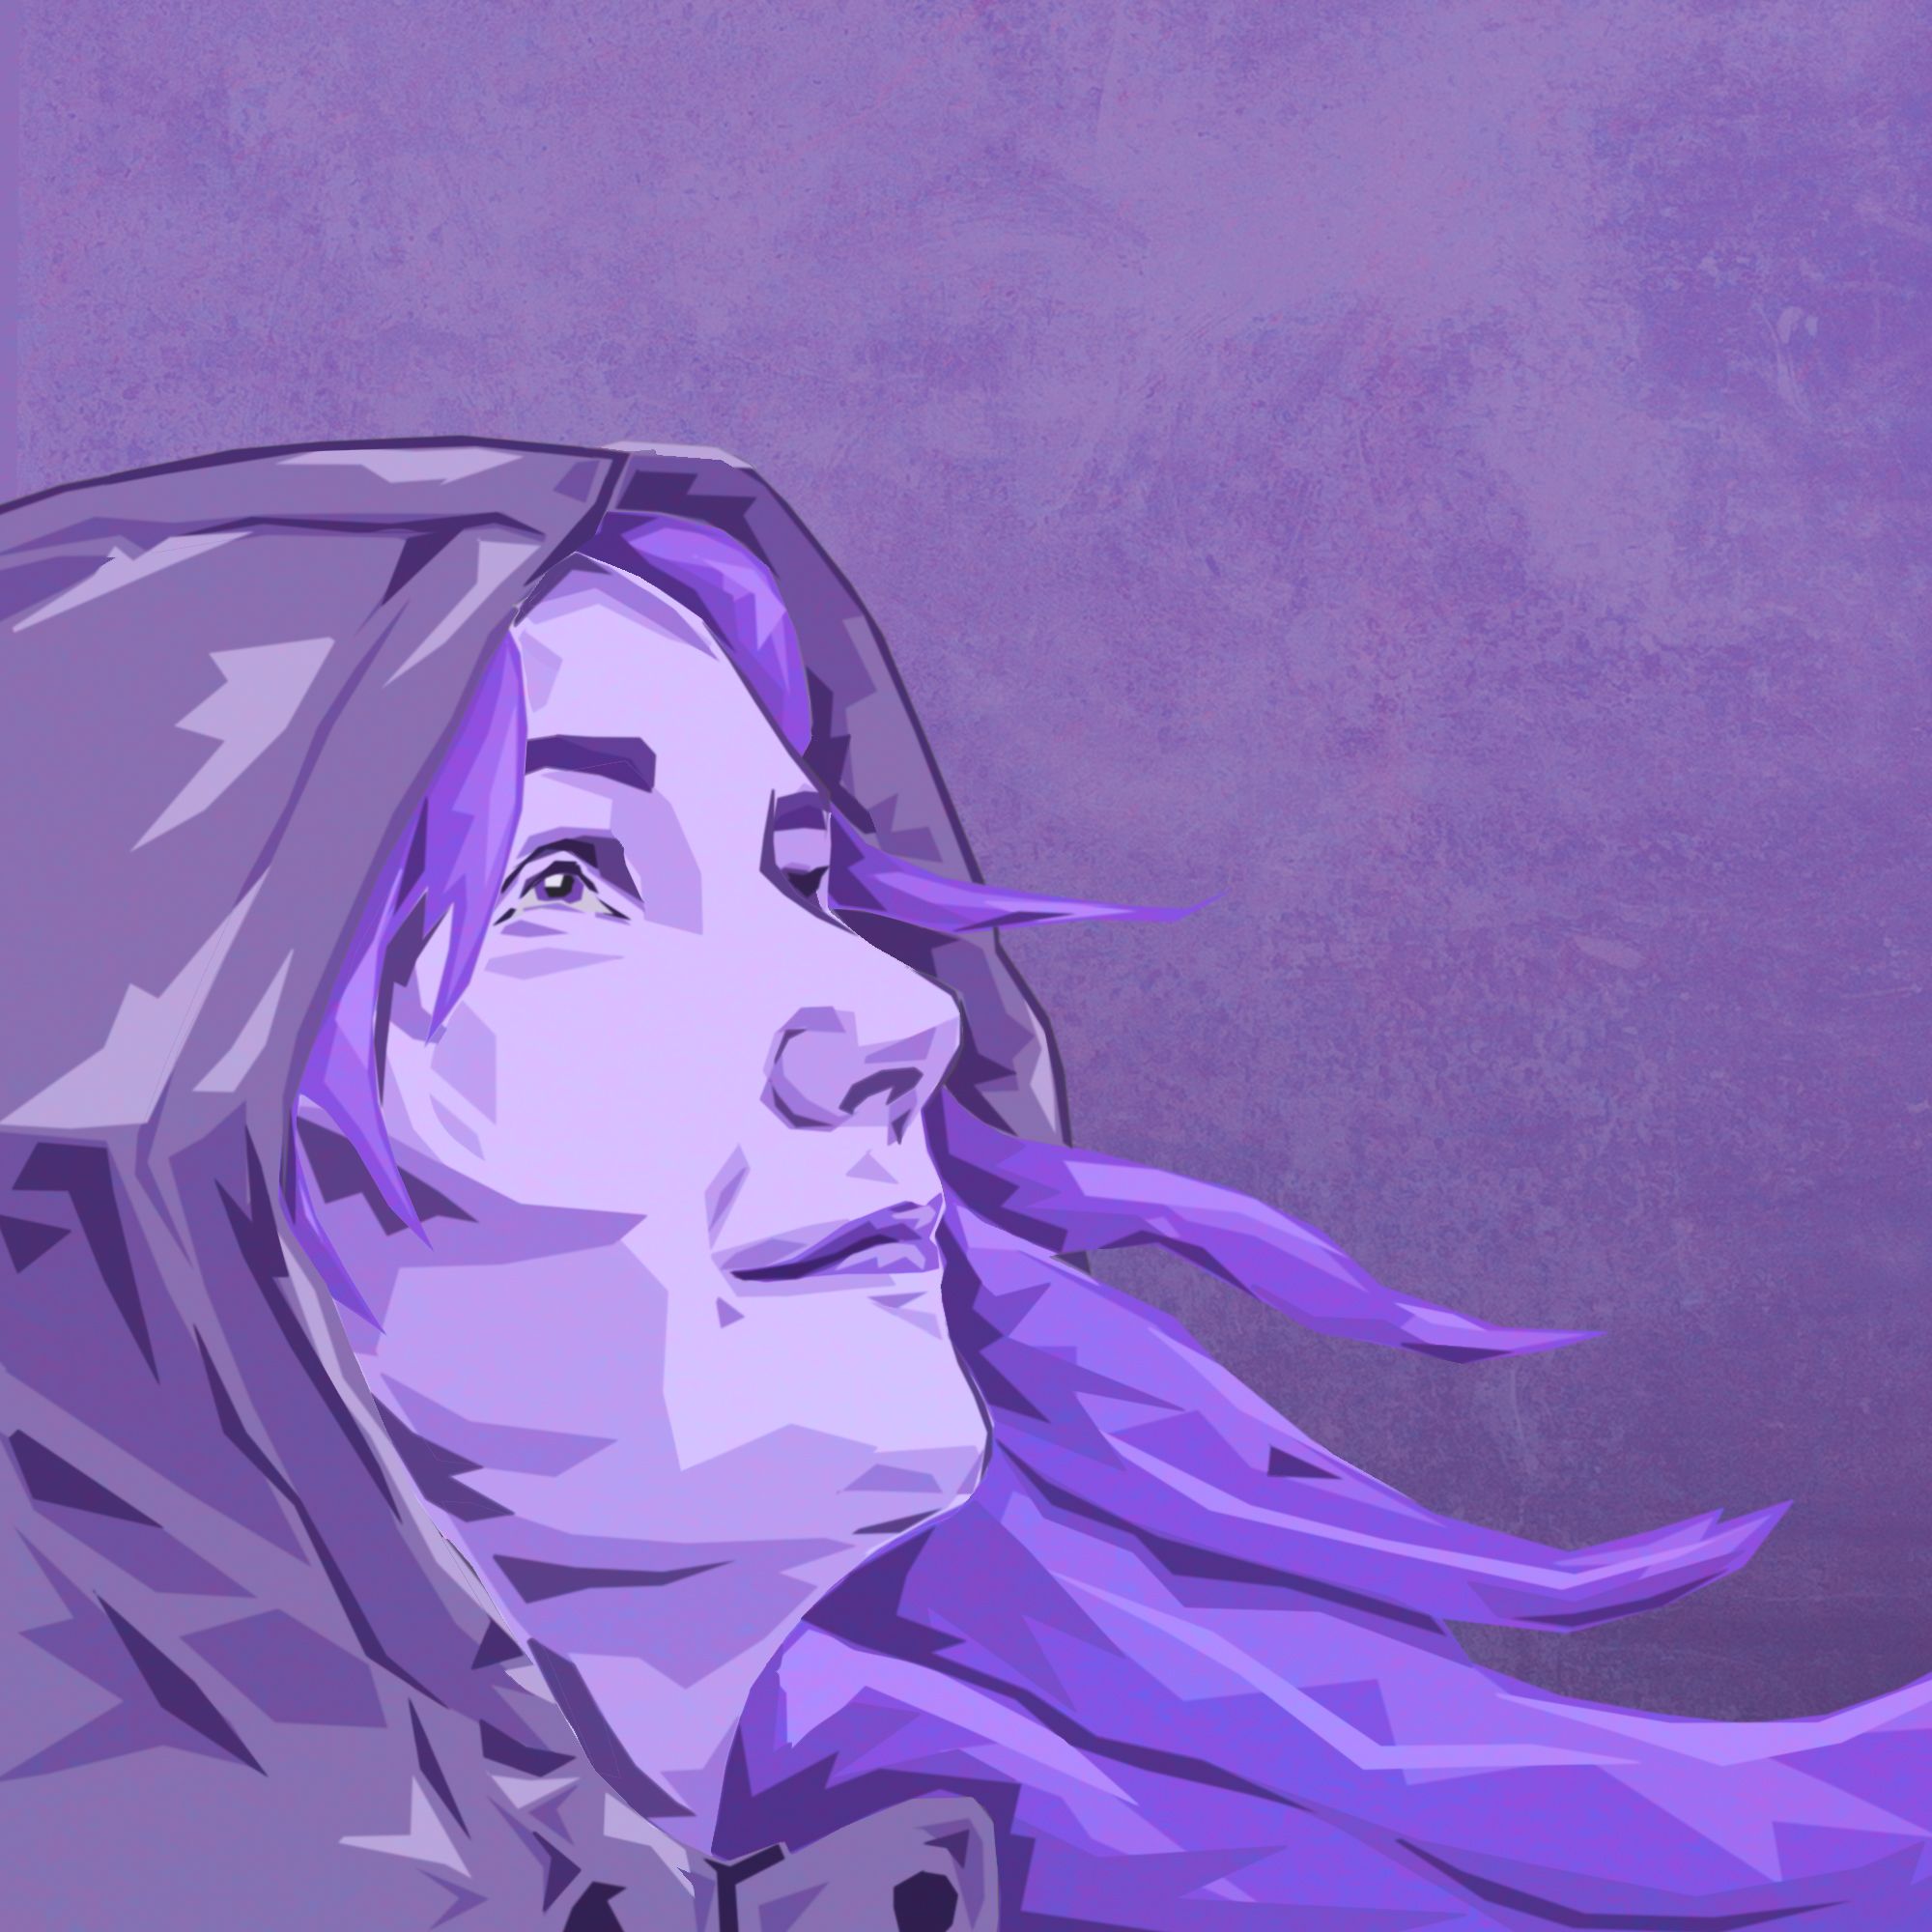 A portrait of Kiri, with long hair and wearing a hoodie, looking upward. The whole painting is done in shades of deep and vibrant purple and gray.